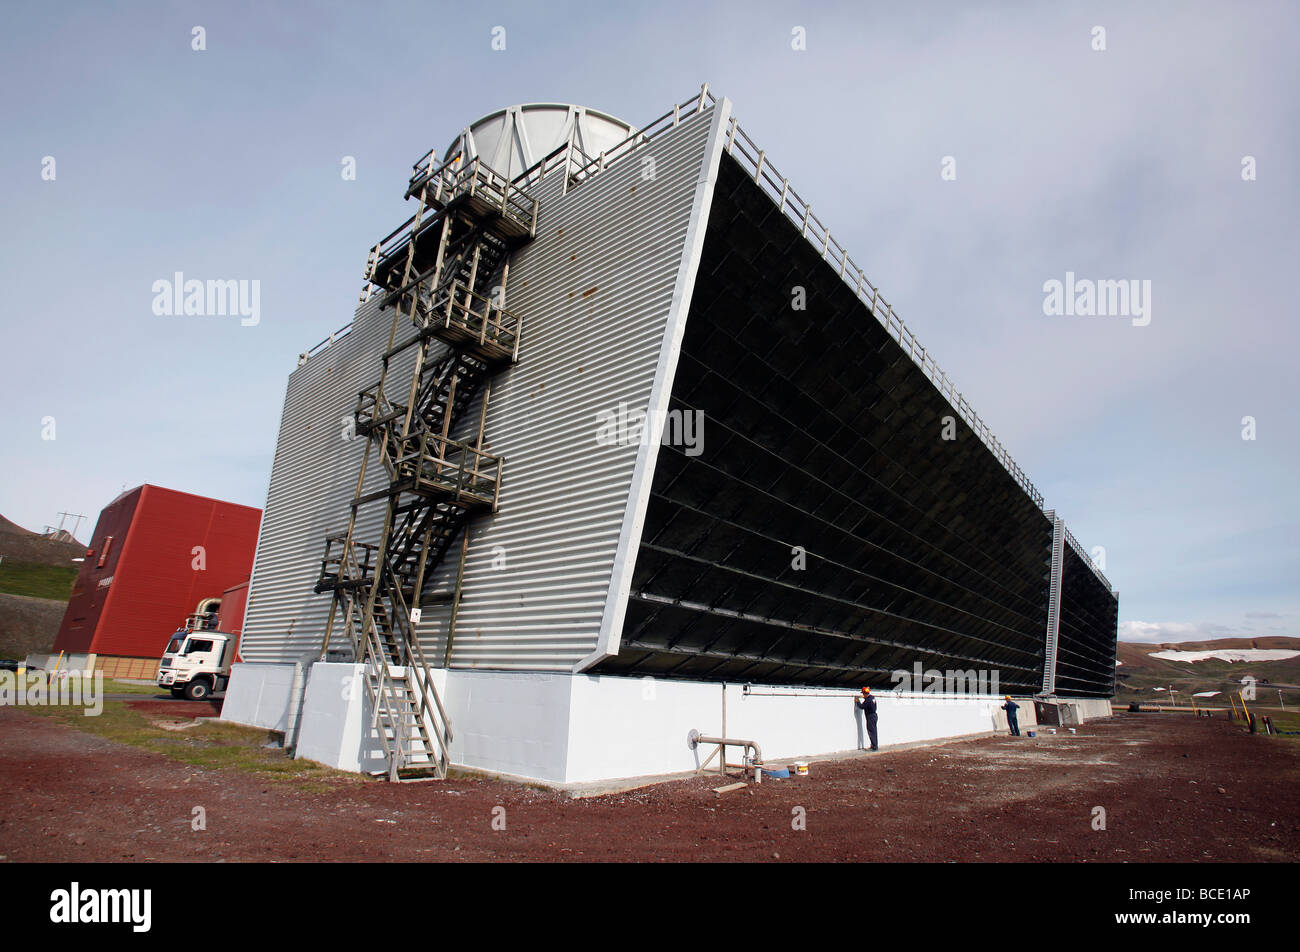 The water cooling tower at the Krafla geothermal power station, Iceland Stock Photo